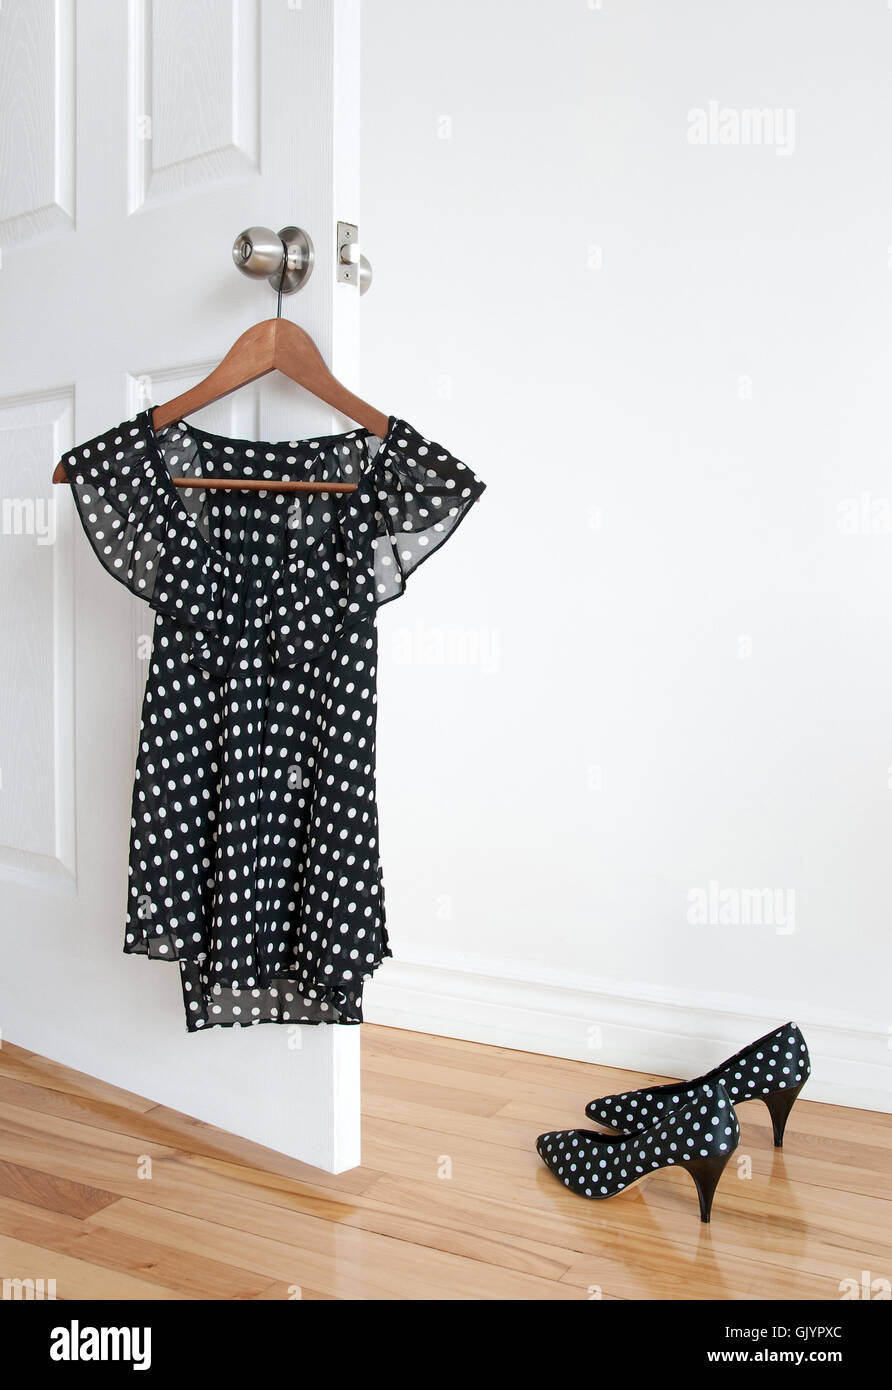 Polka dot blouse on a hanger and shoes on the floor Stock Photo